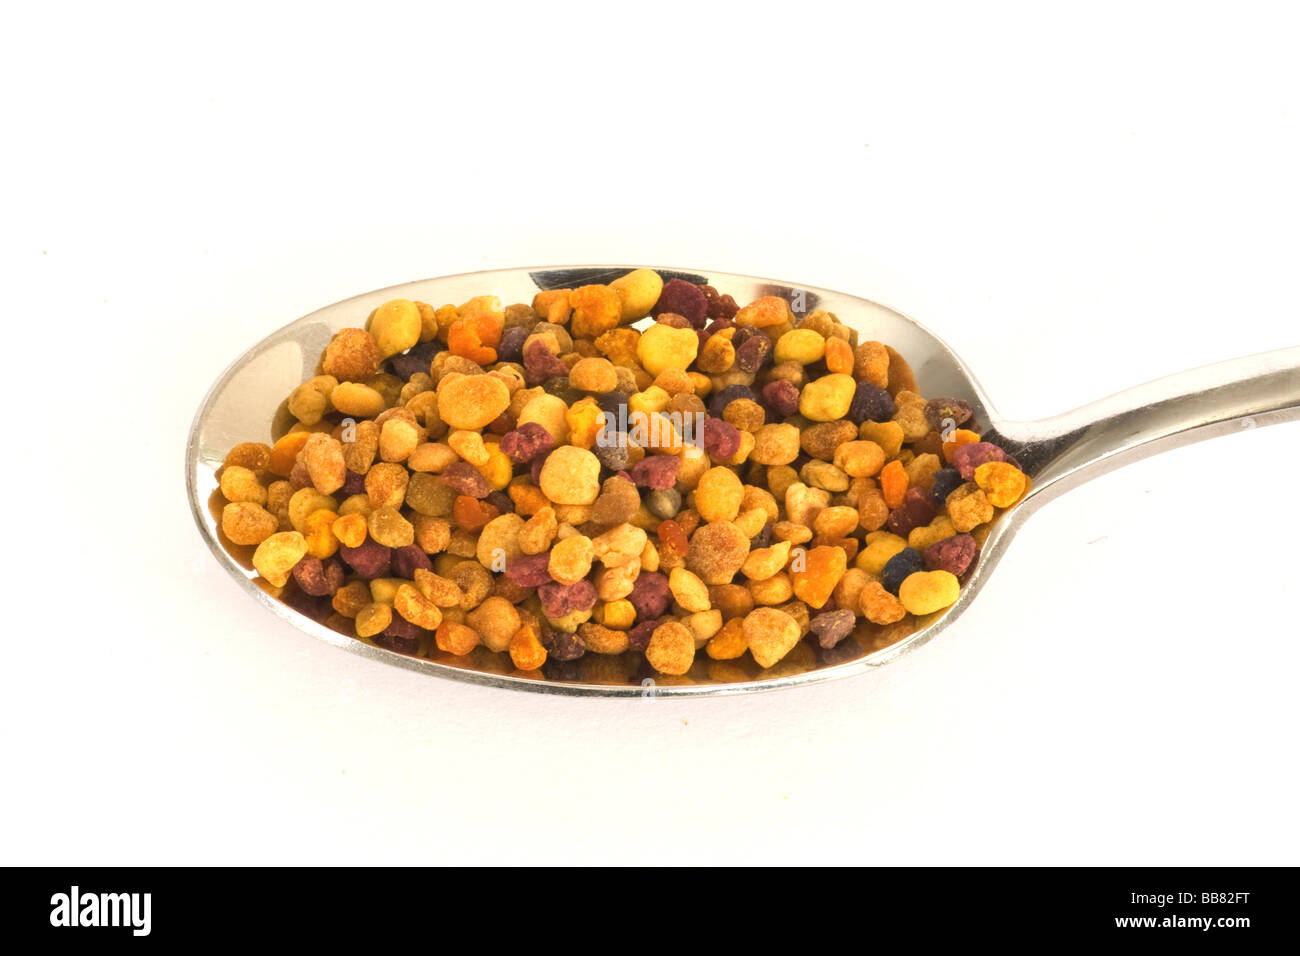 Blossom pollen from a beekeeper on a spoon Stock Photo